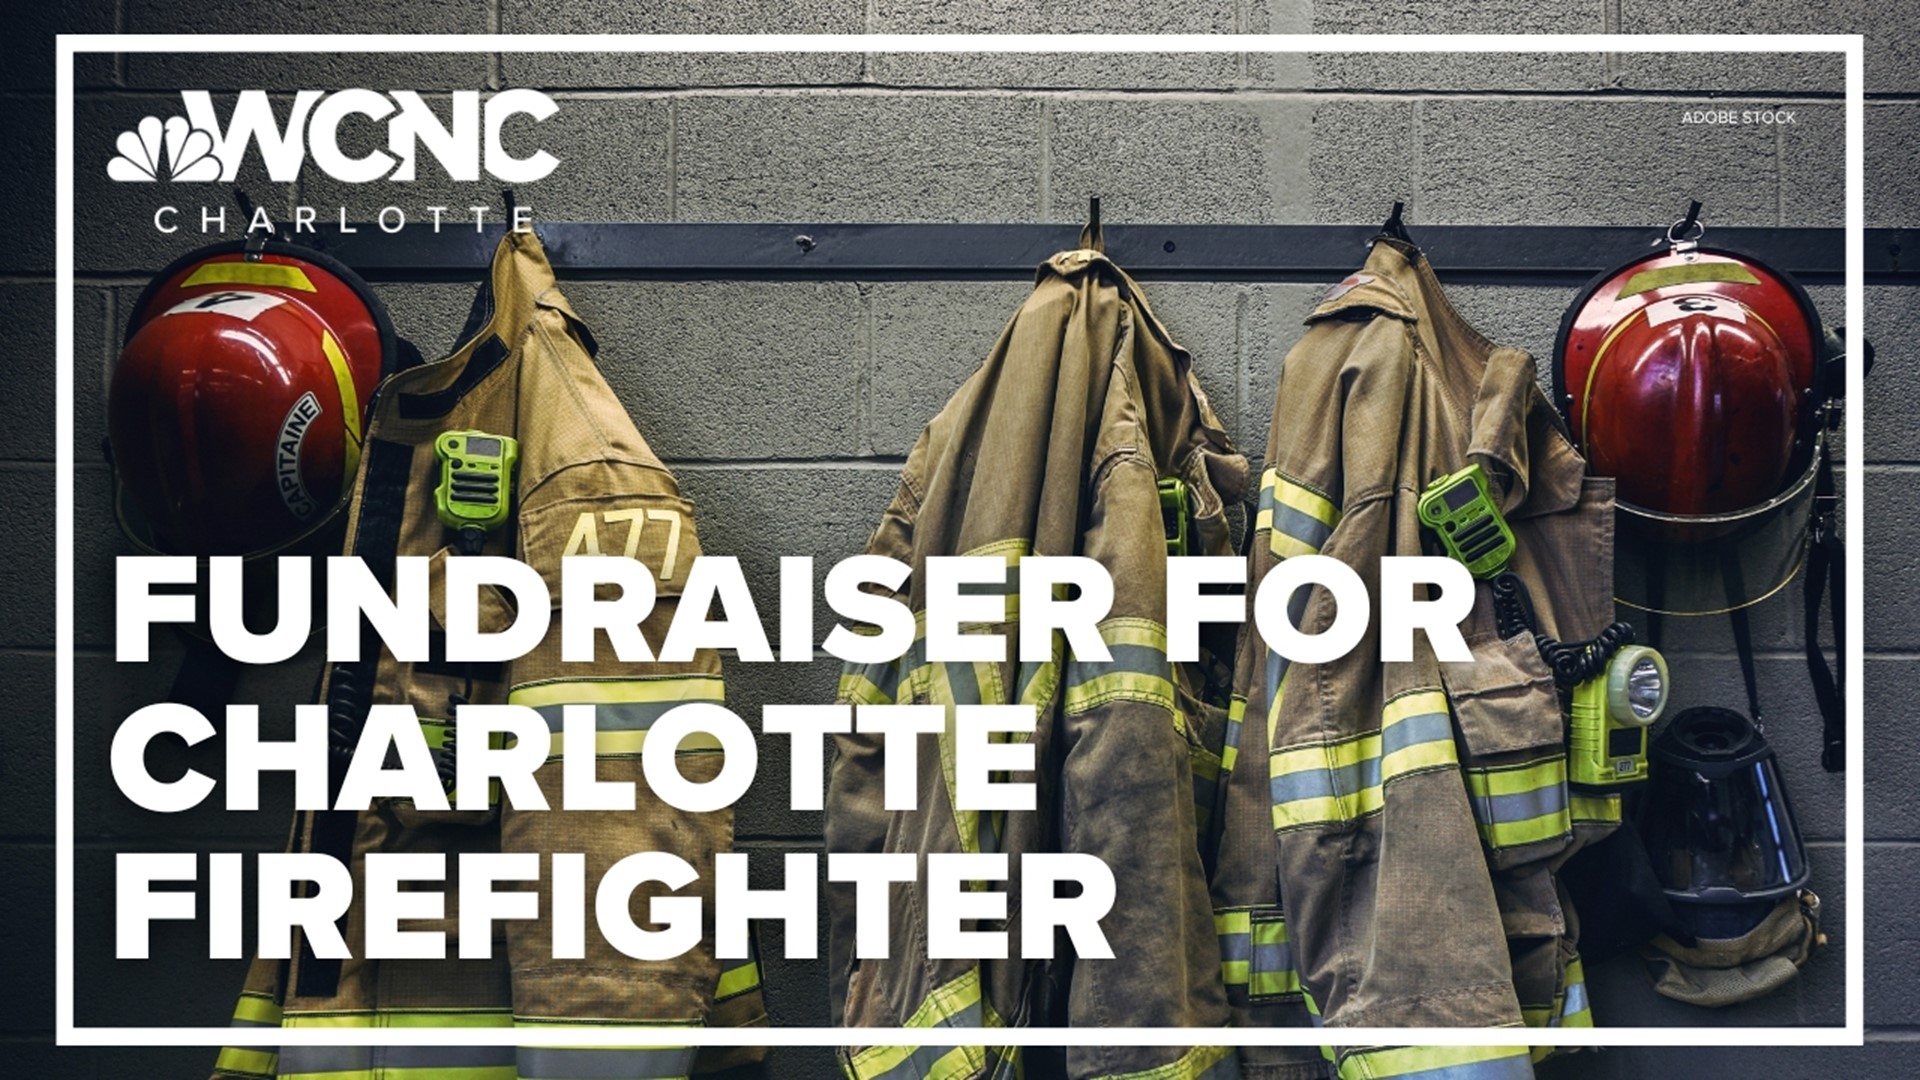 The Charlotte Fire Department is collecting donations to airlift Captain Tripp Fincher from Kansas back home to Charlotte to continue his recovery.